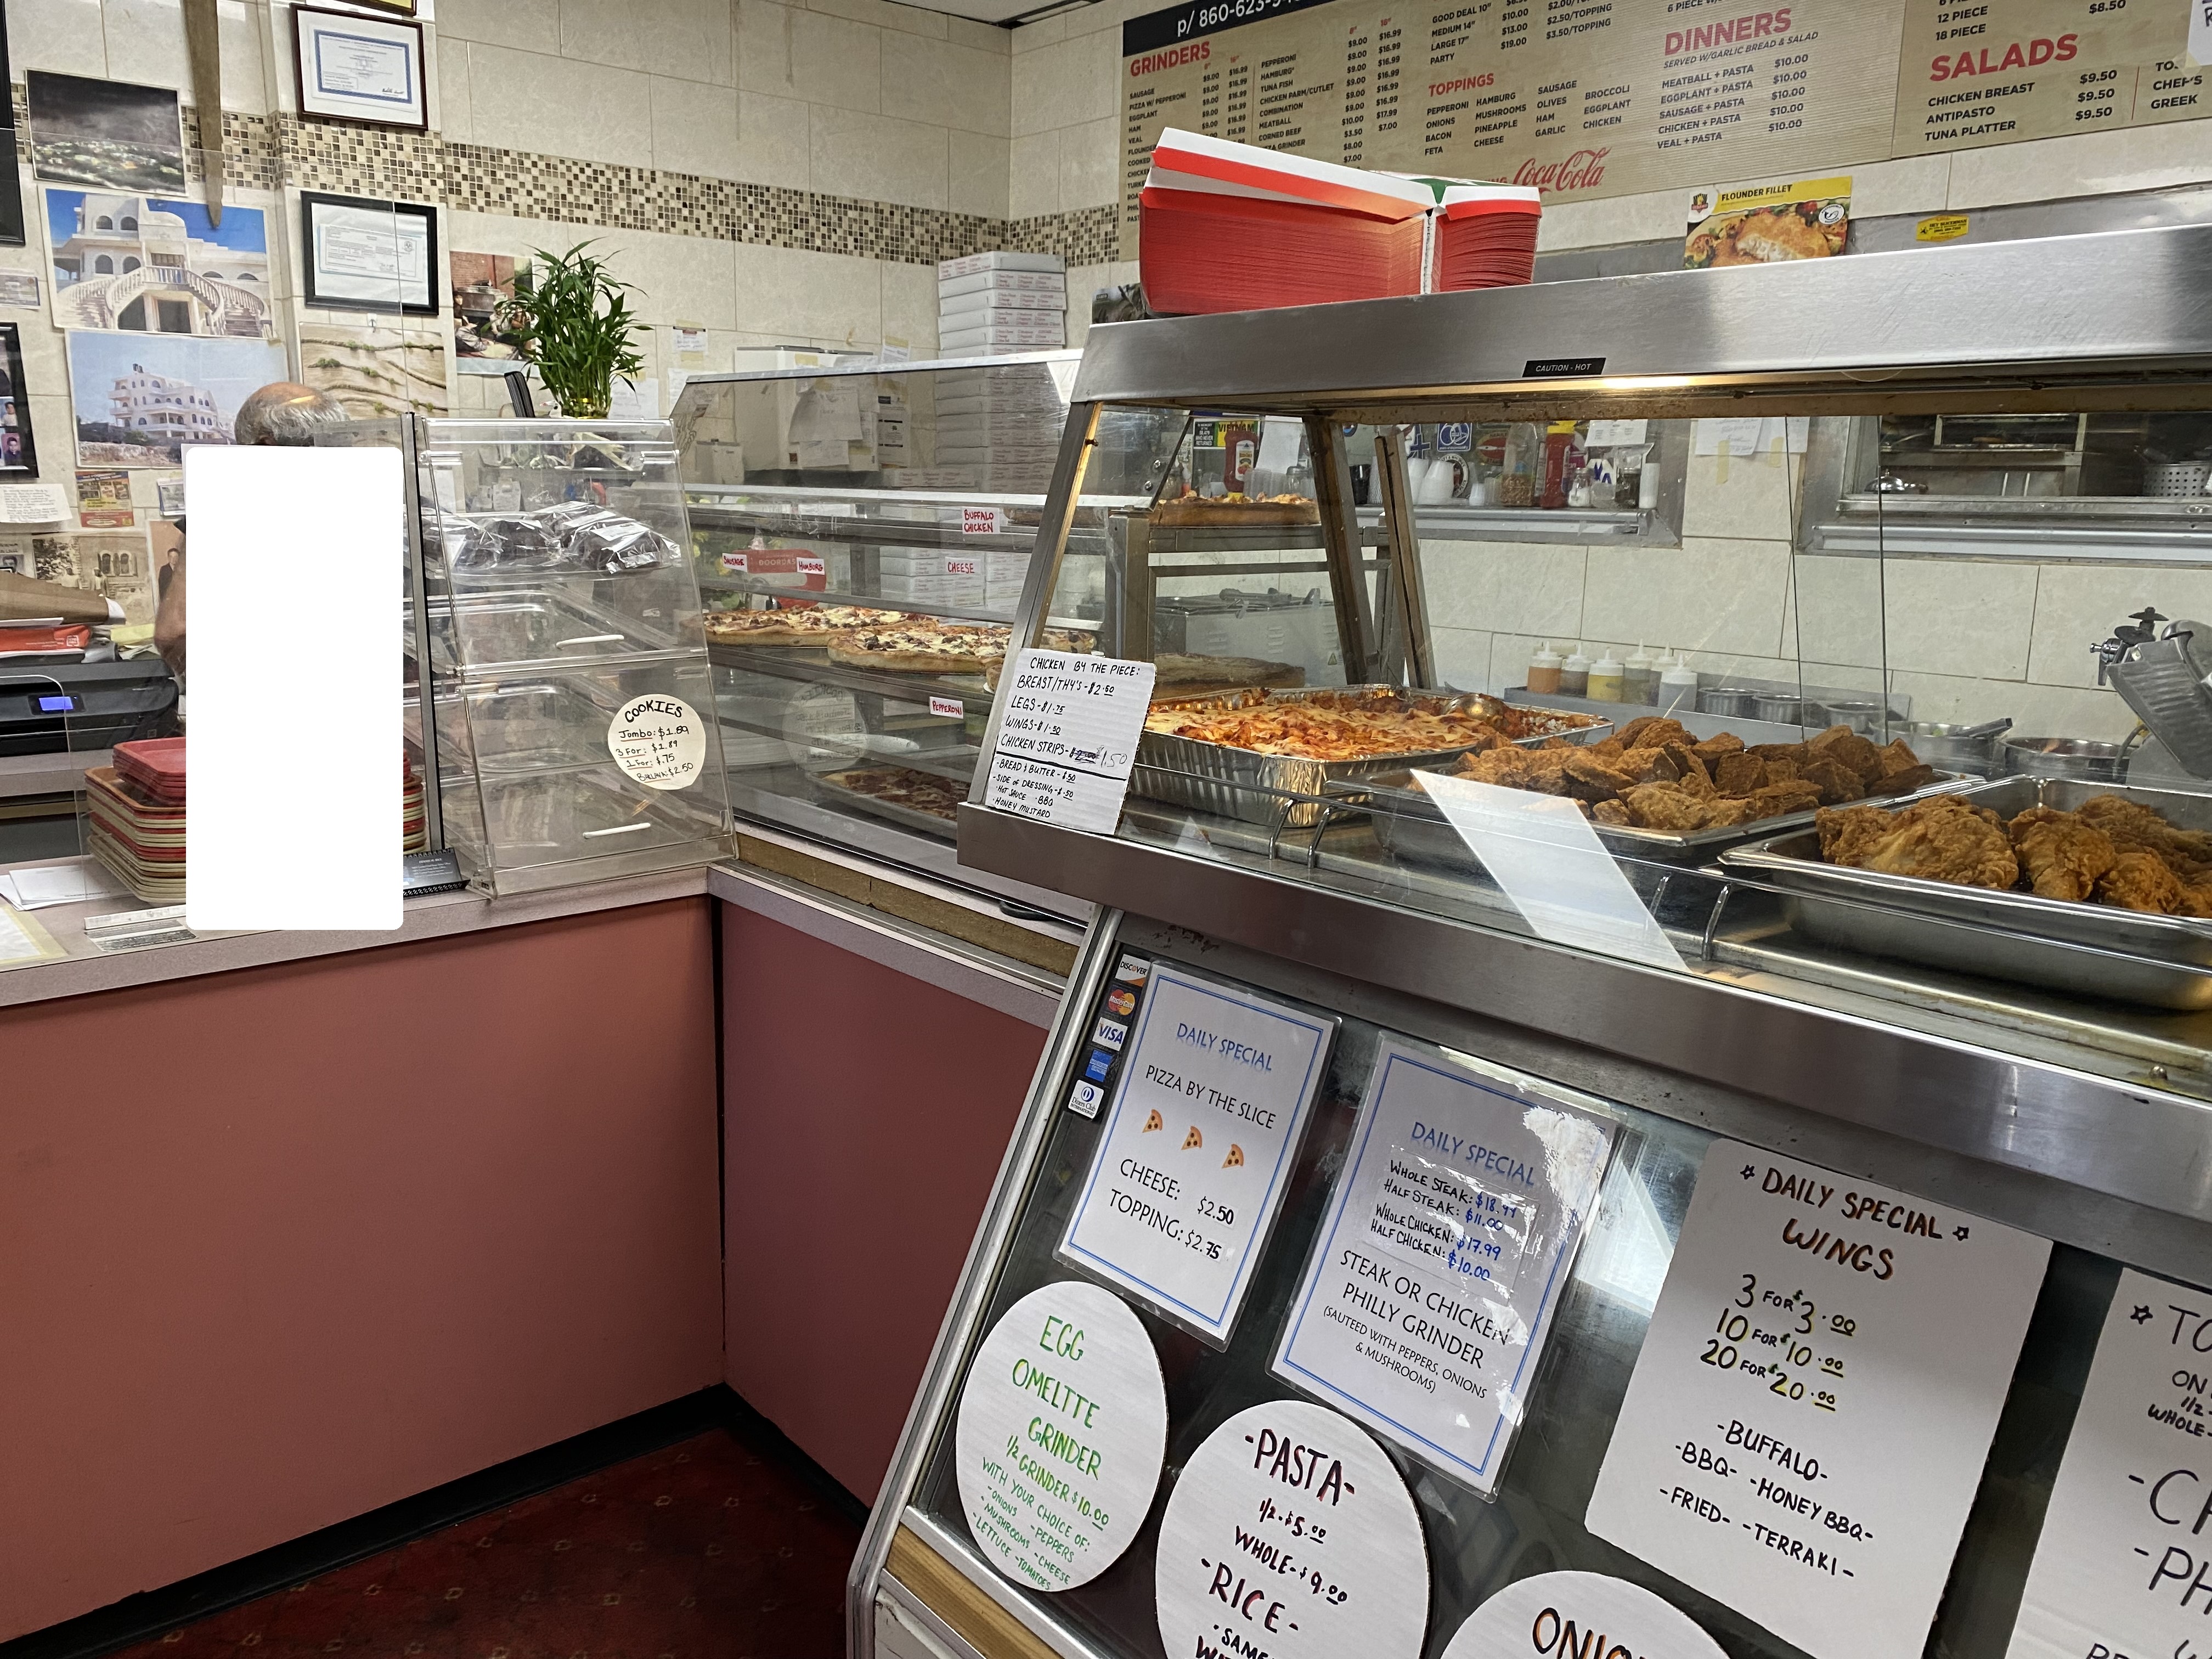 QSR - Sandwich/Pizza Business for Sale in CT